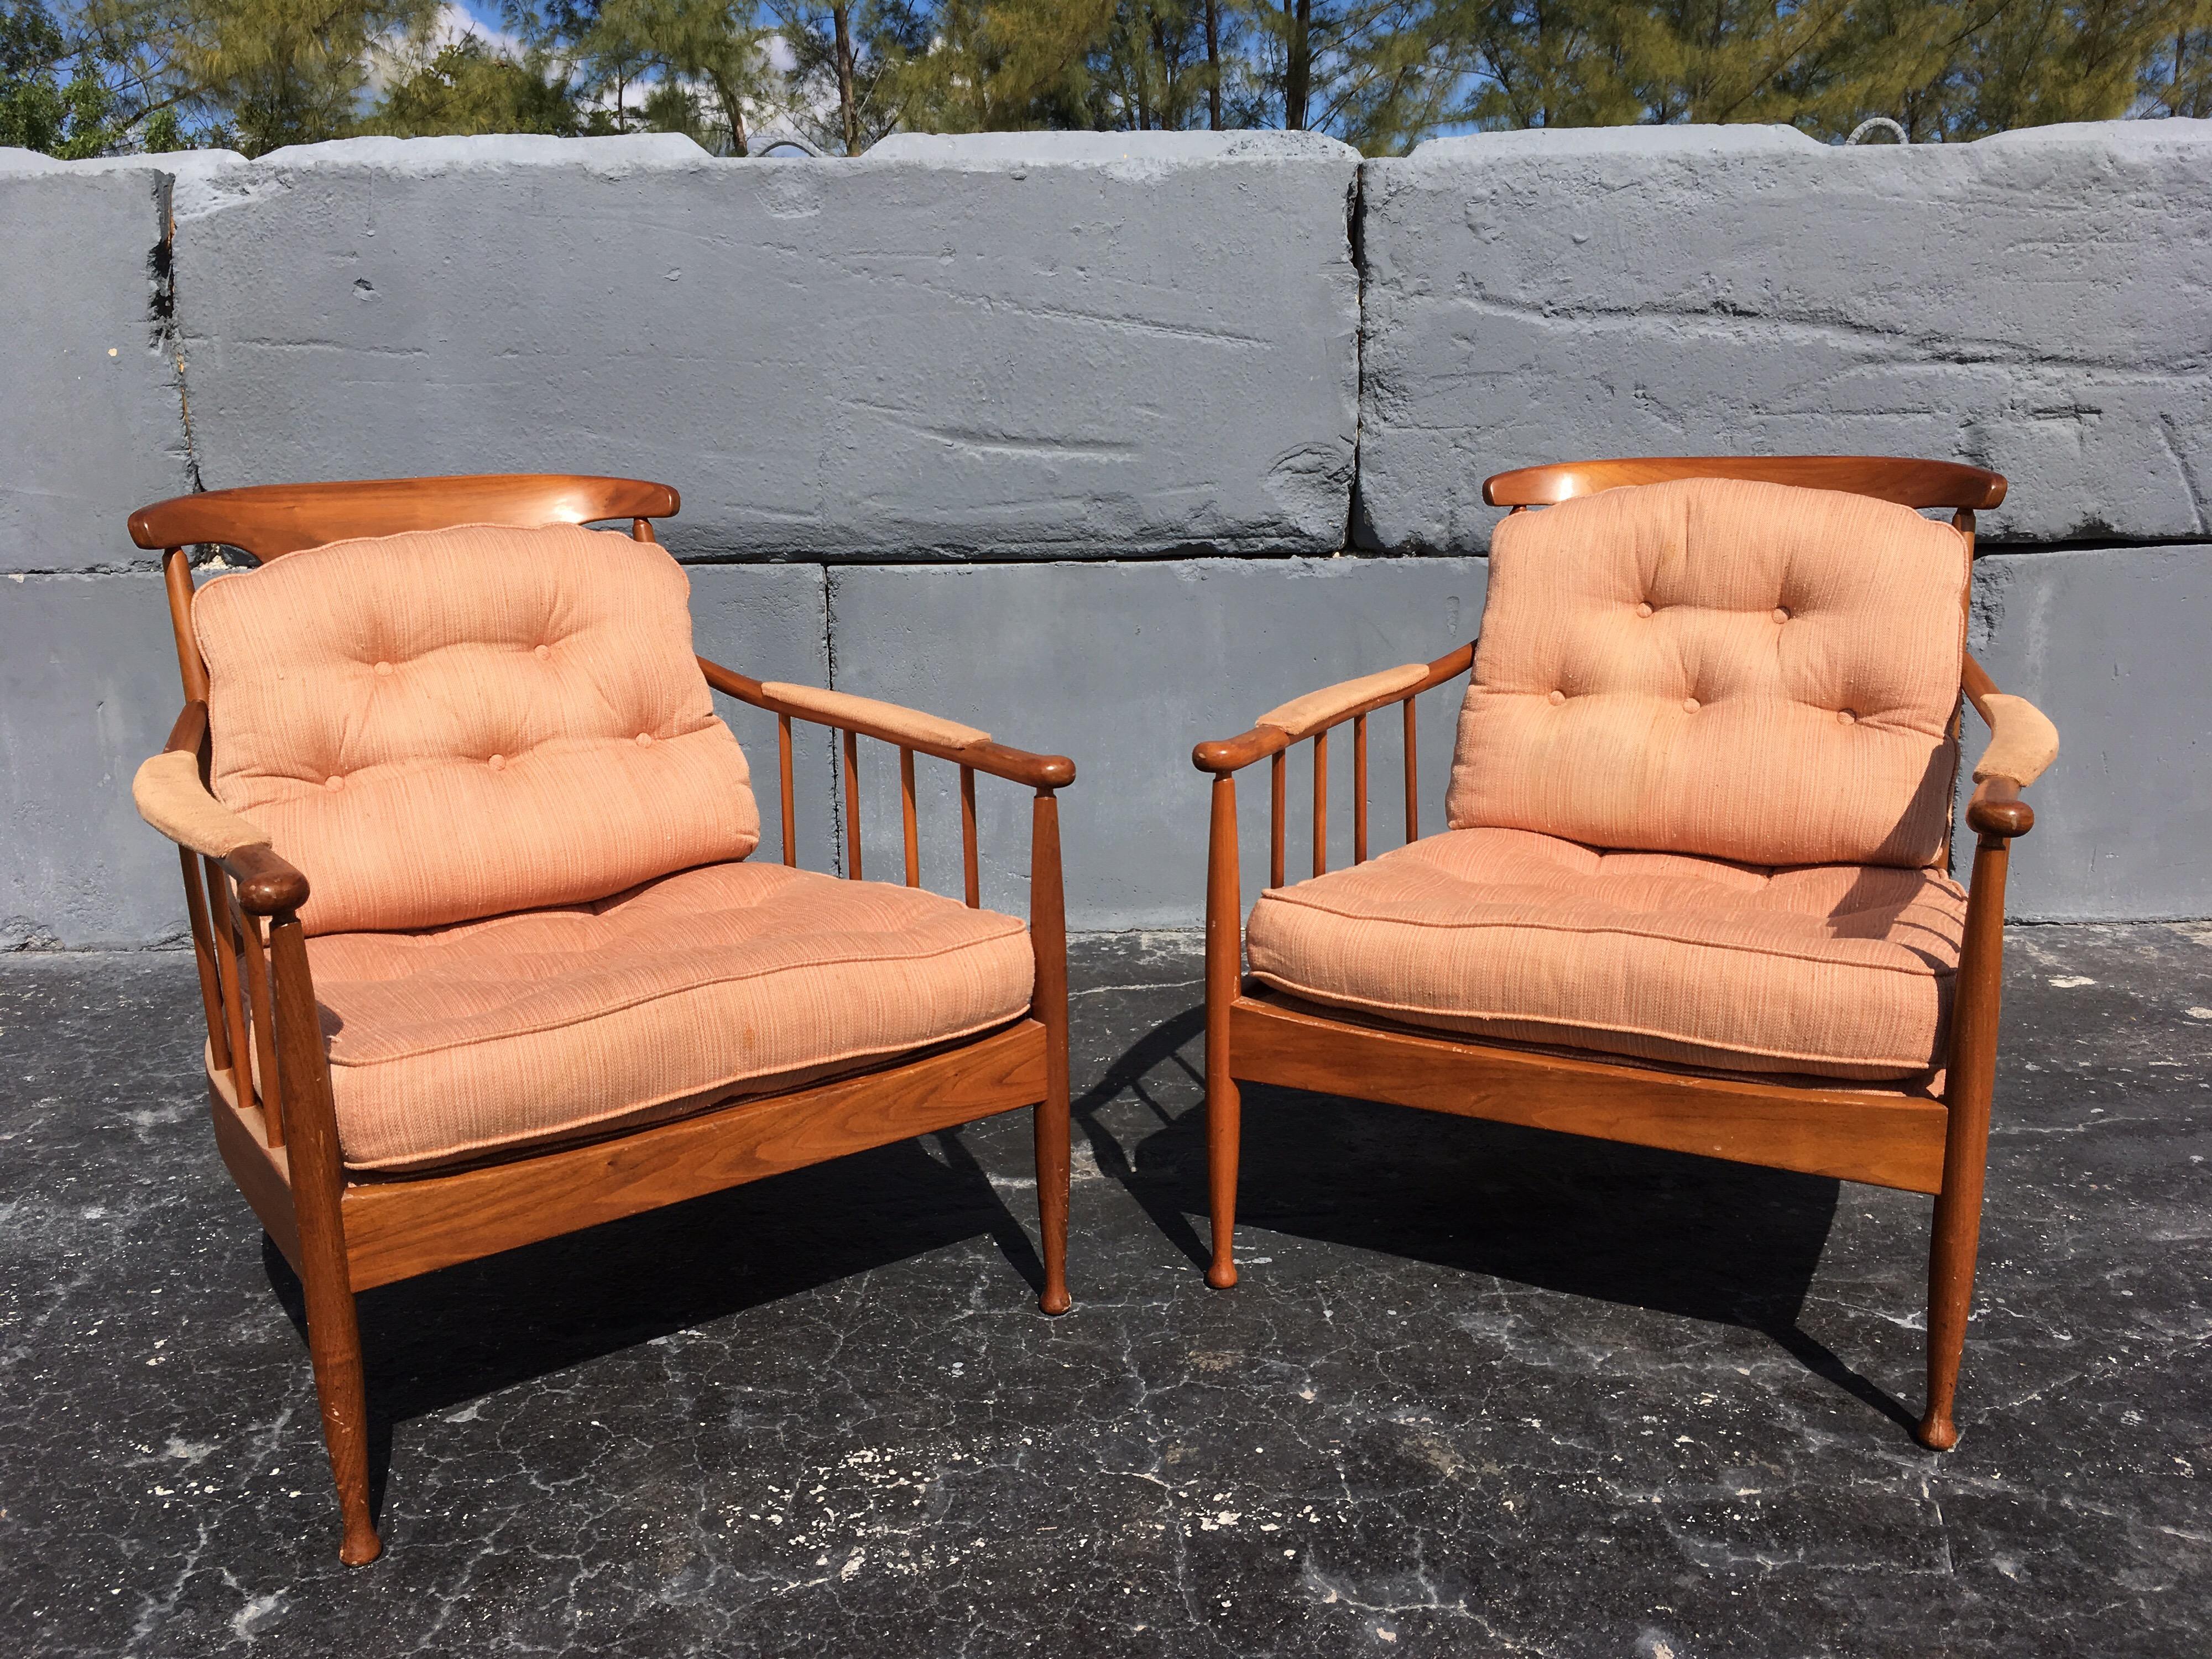 We will refinish the wood frames and they will be in excellent condition. The fabric cushions need to be recovered, we can help.... we work with the best in town. Price is for the pair.